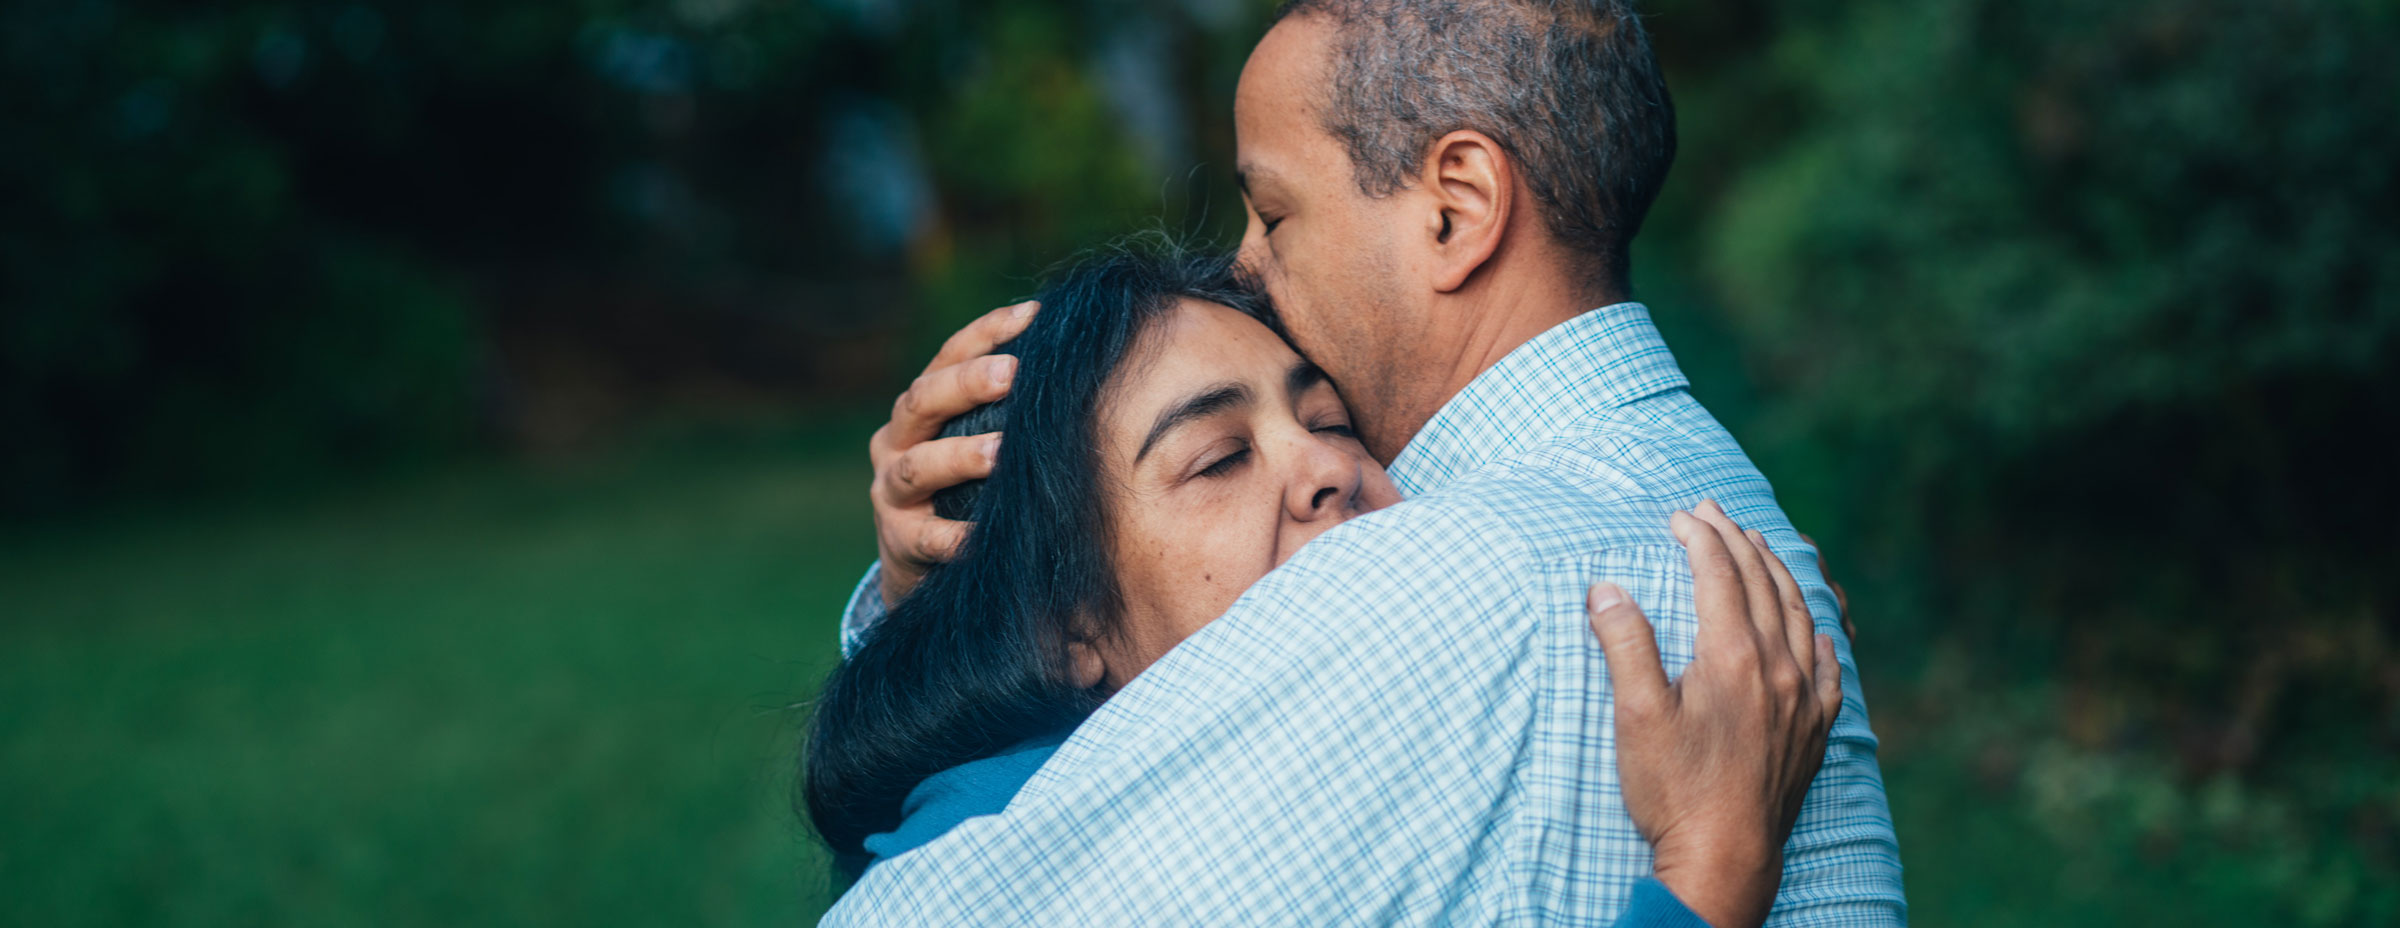 How To Forgive Your Spouse When You Don't Feel Like It